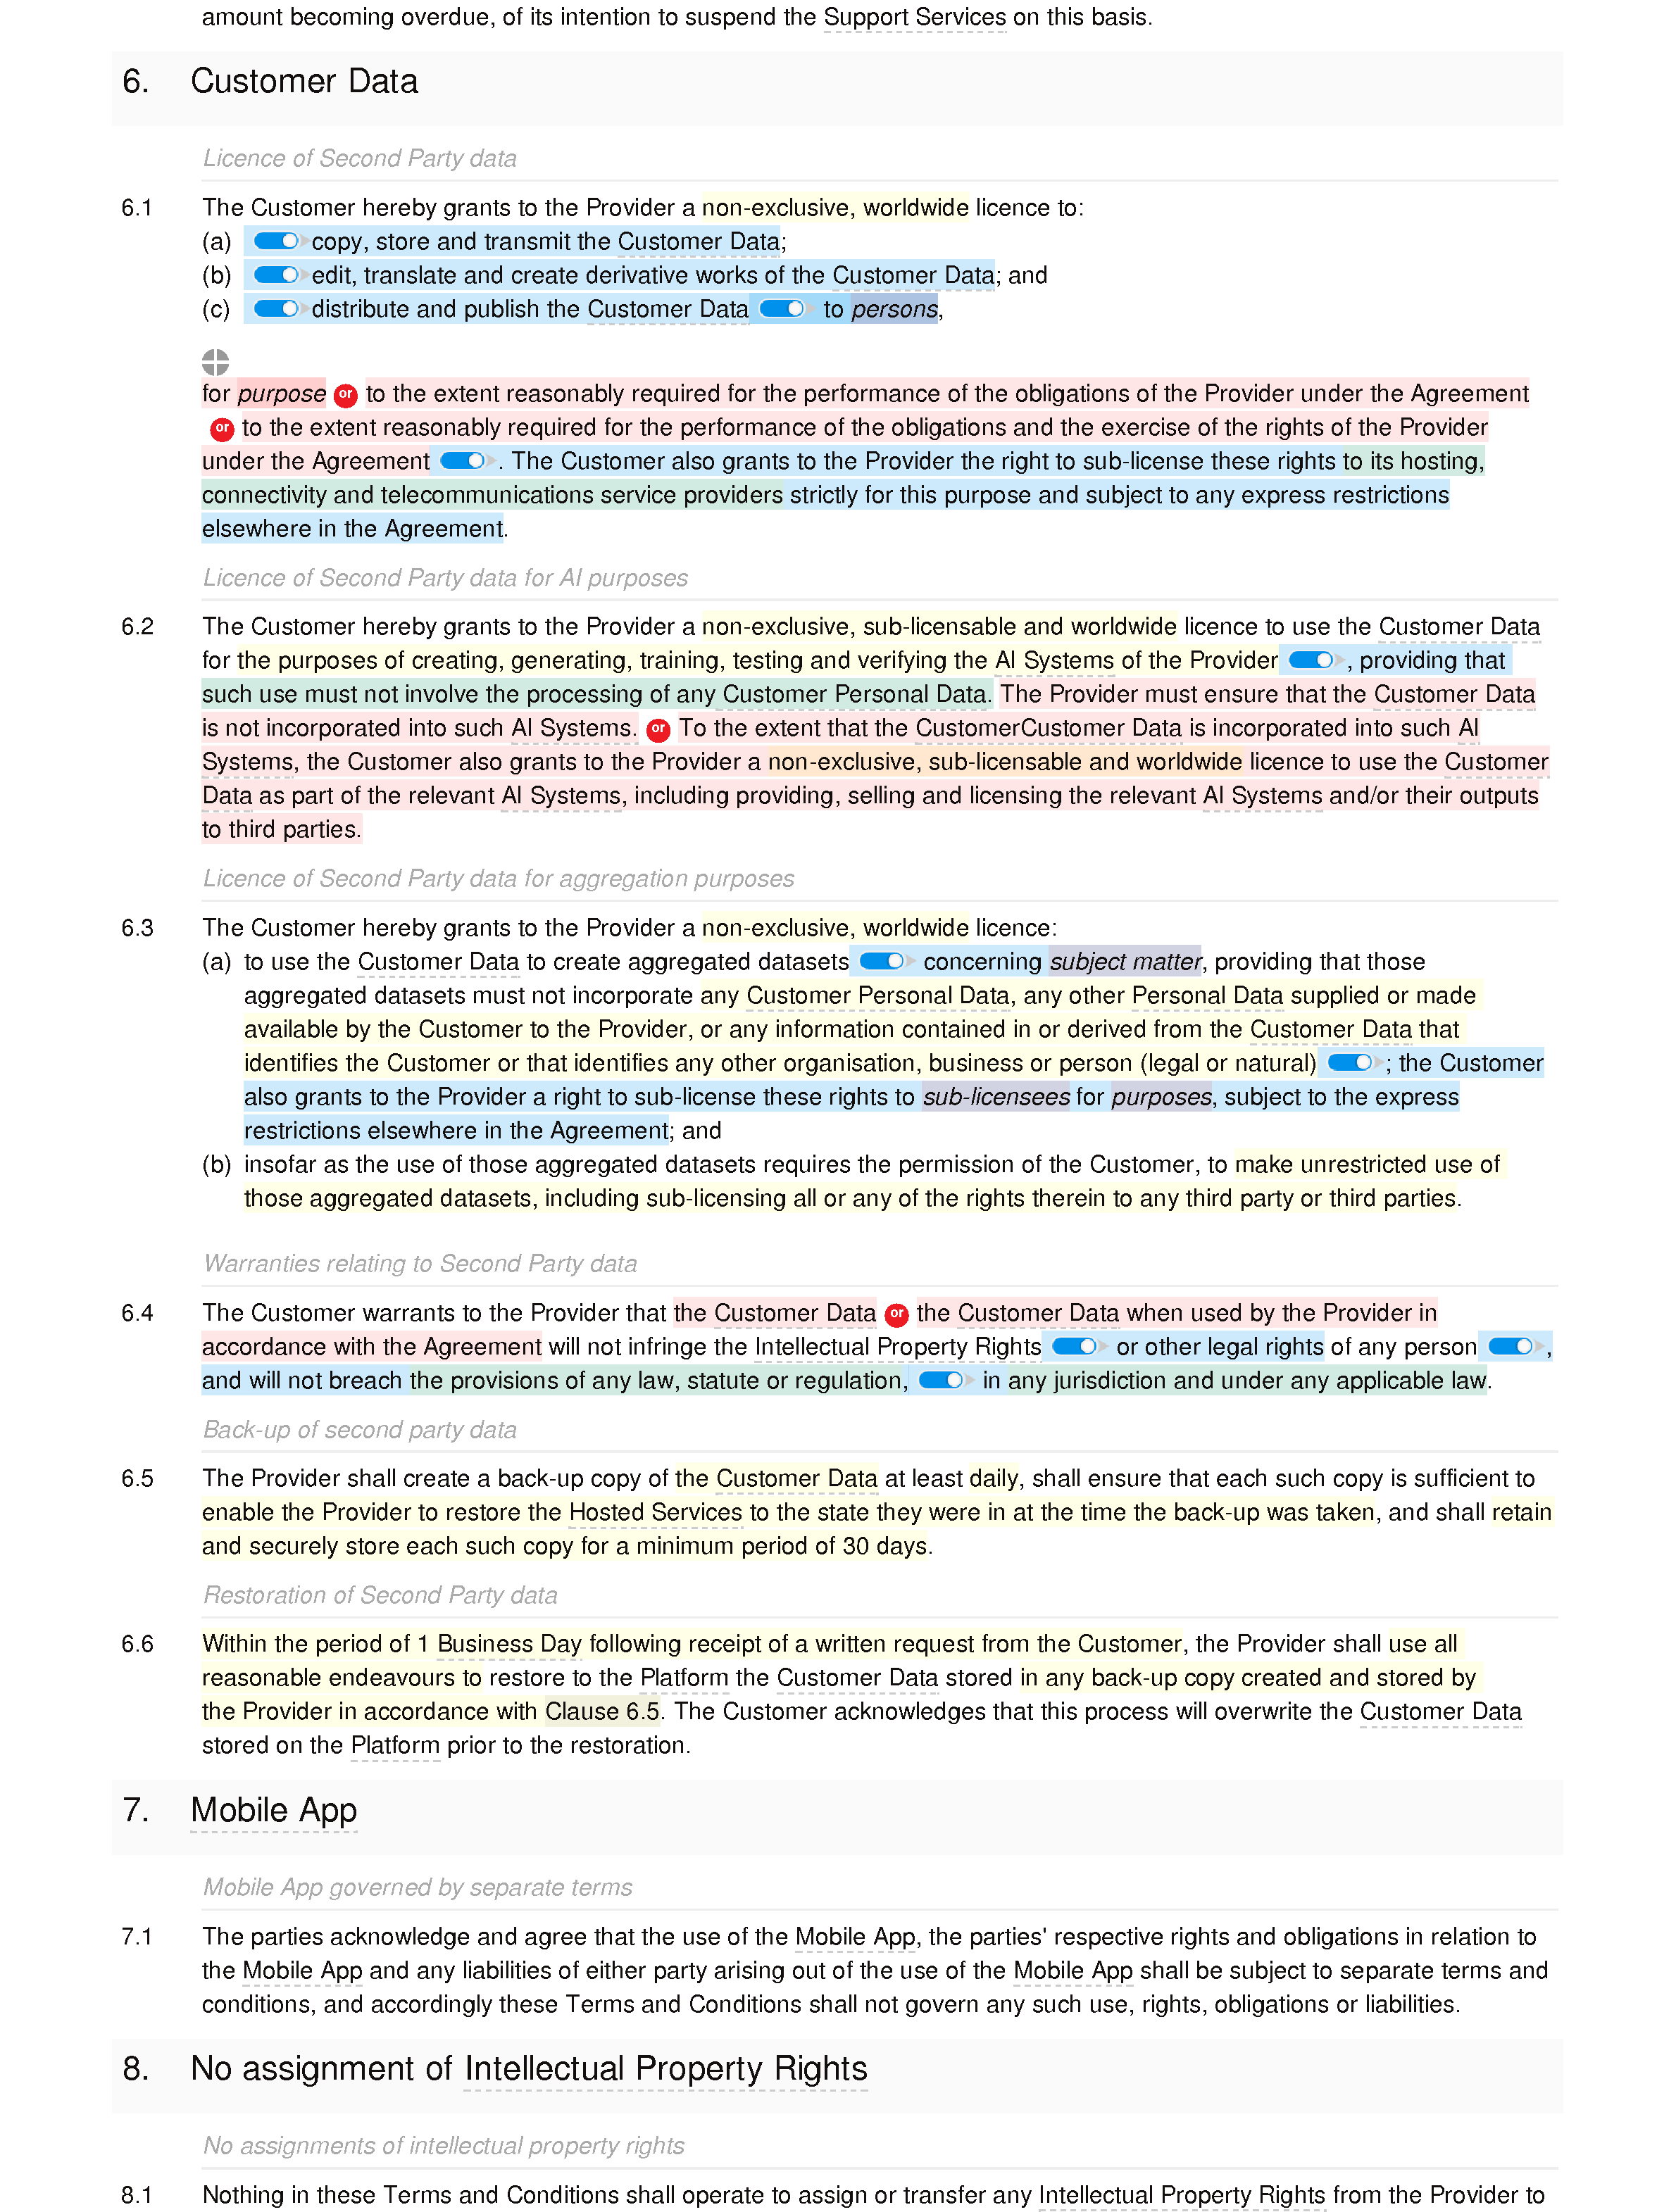 SaaS terms and conditions (basic) document editor preview